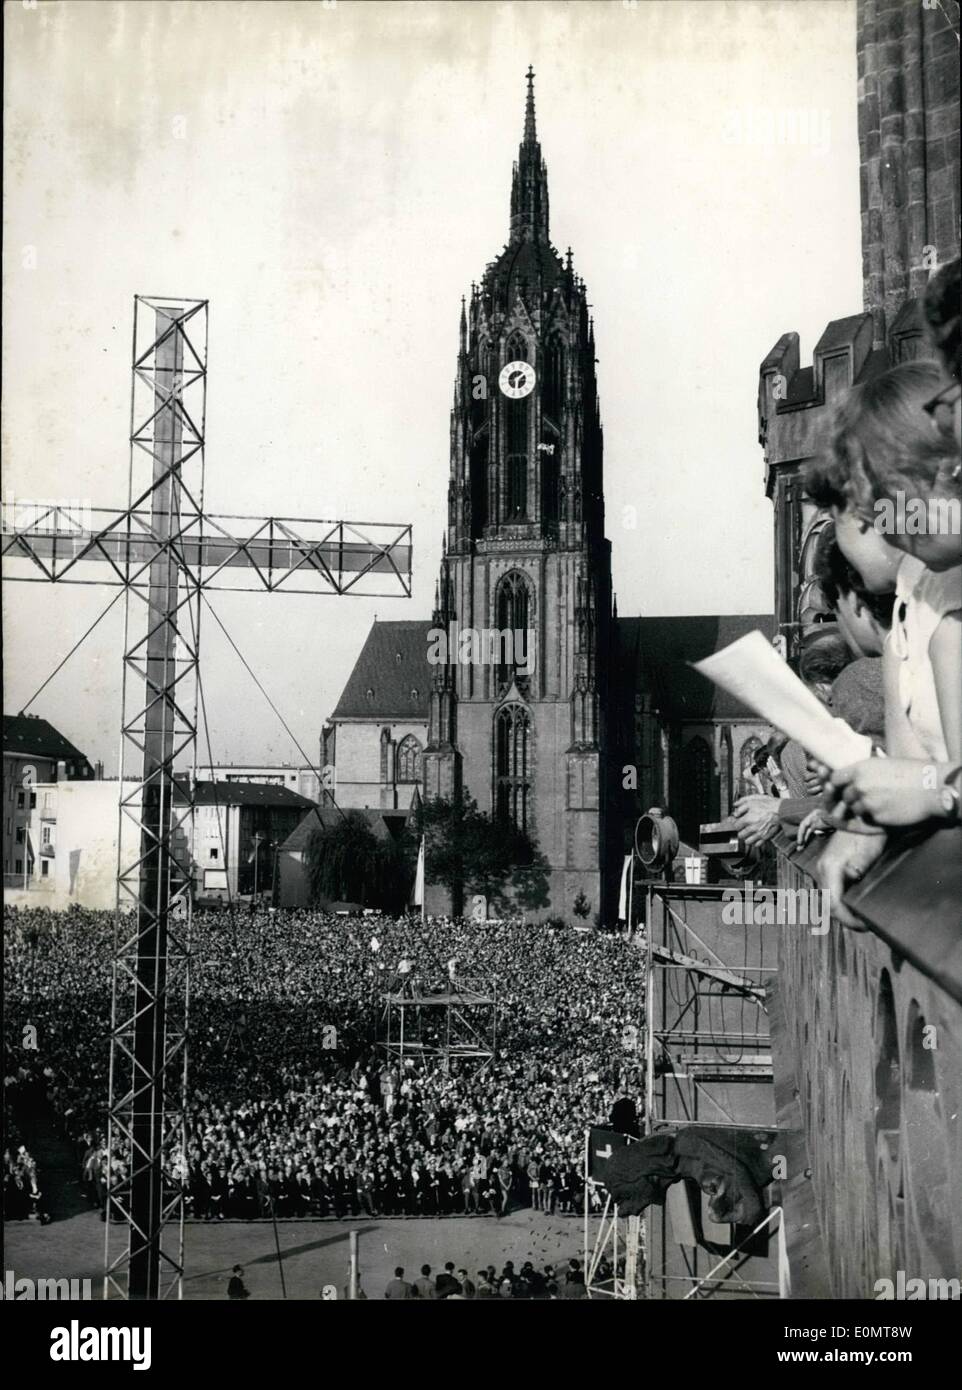 Aug. 08, 1956 - Protestant Church Day opened in Frankfurt; Over 50000 persons from both parts of Germany ans many foreign countries took part in a divine service in Frankfurt this afternoon which officially opened then 7th German Protestant Church Day. Among the honor guests were Federal Republics President Prof. Heuss and East Zone's deputy Prime Minister Nuschke. Photo Shows a general view of the service in front of Frankfurt's Cathedral. Stock Photo